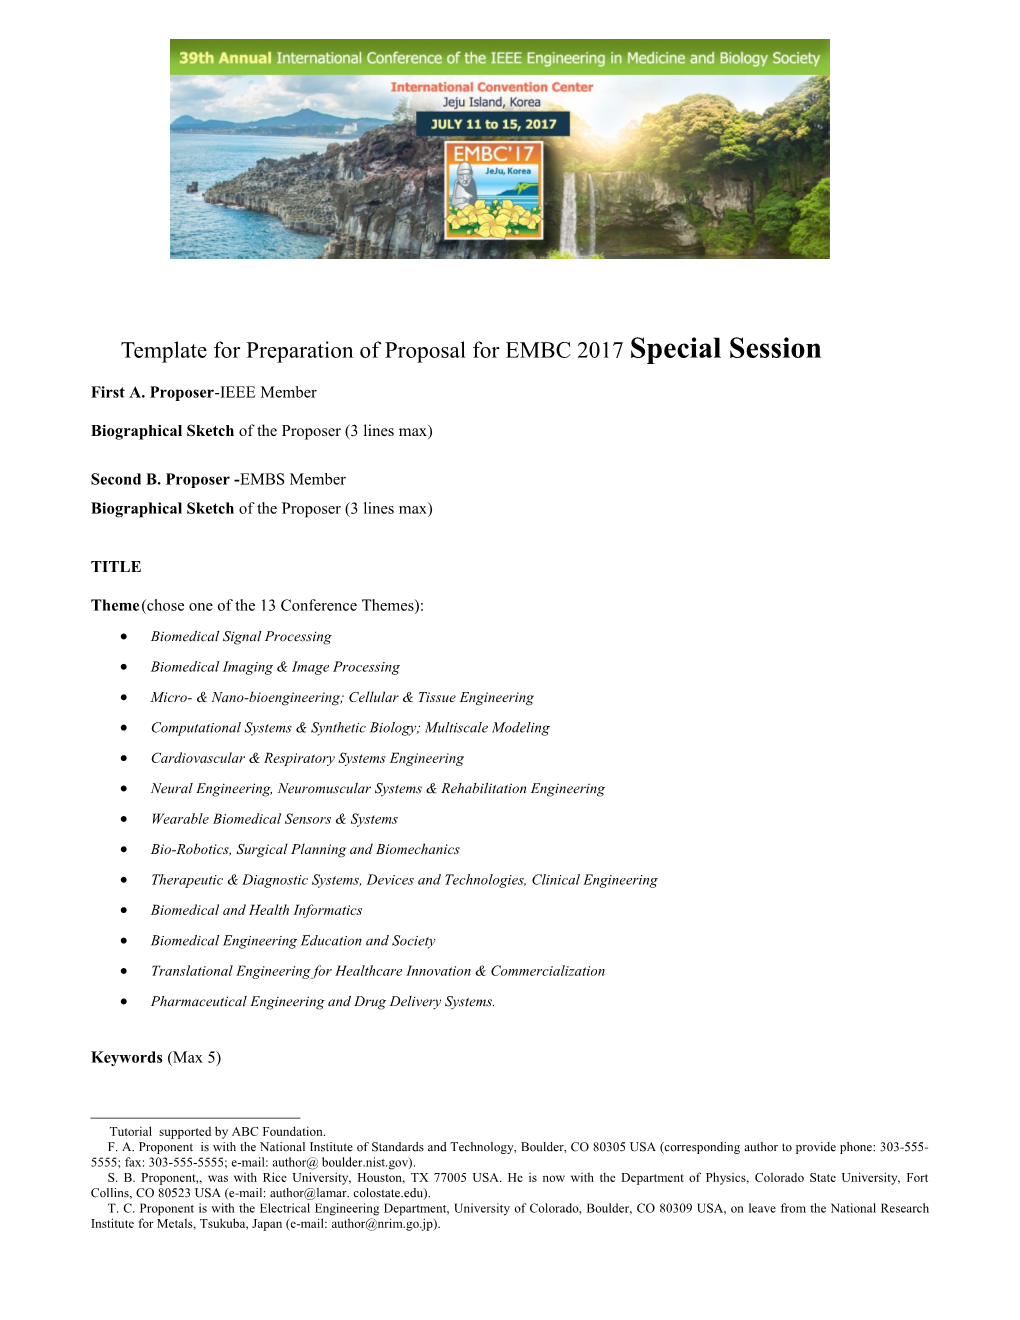 Template for Preparation of Proposal for EMBC 2017 Special Session